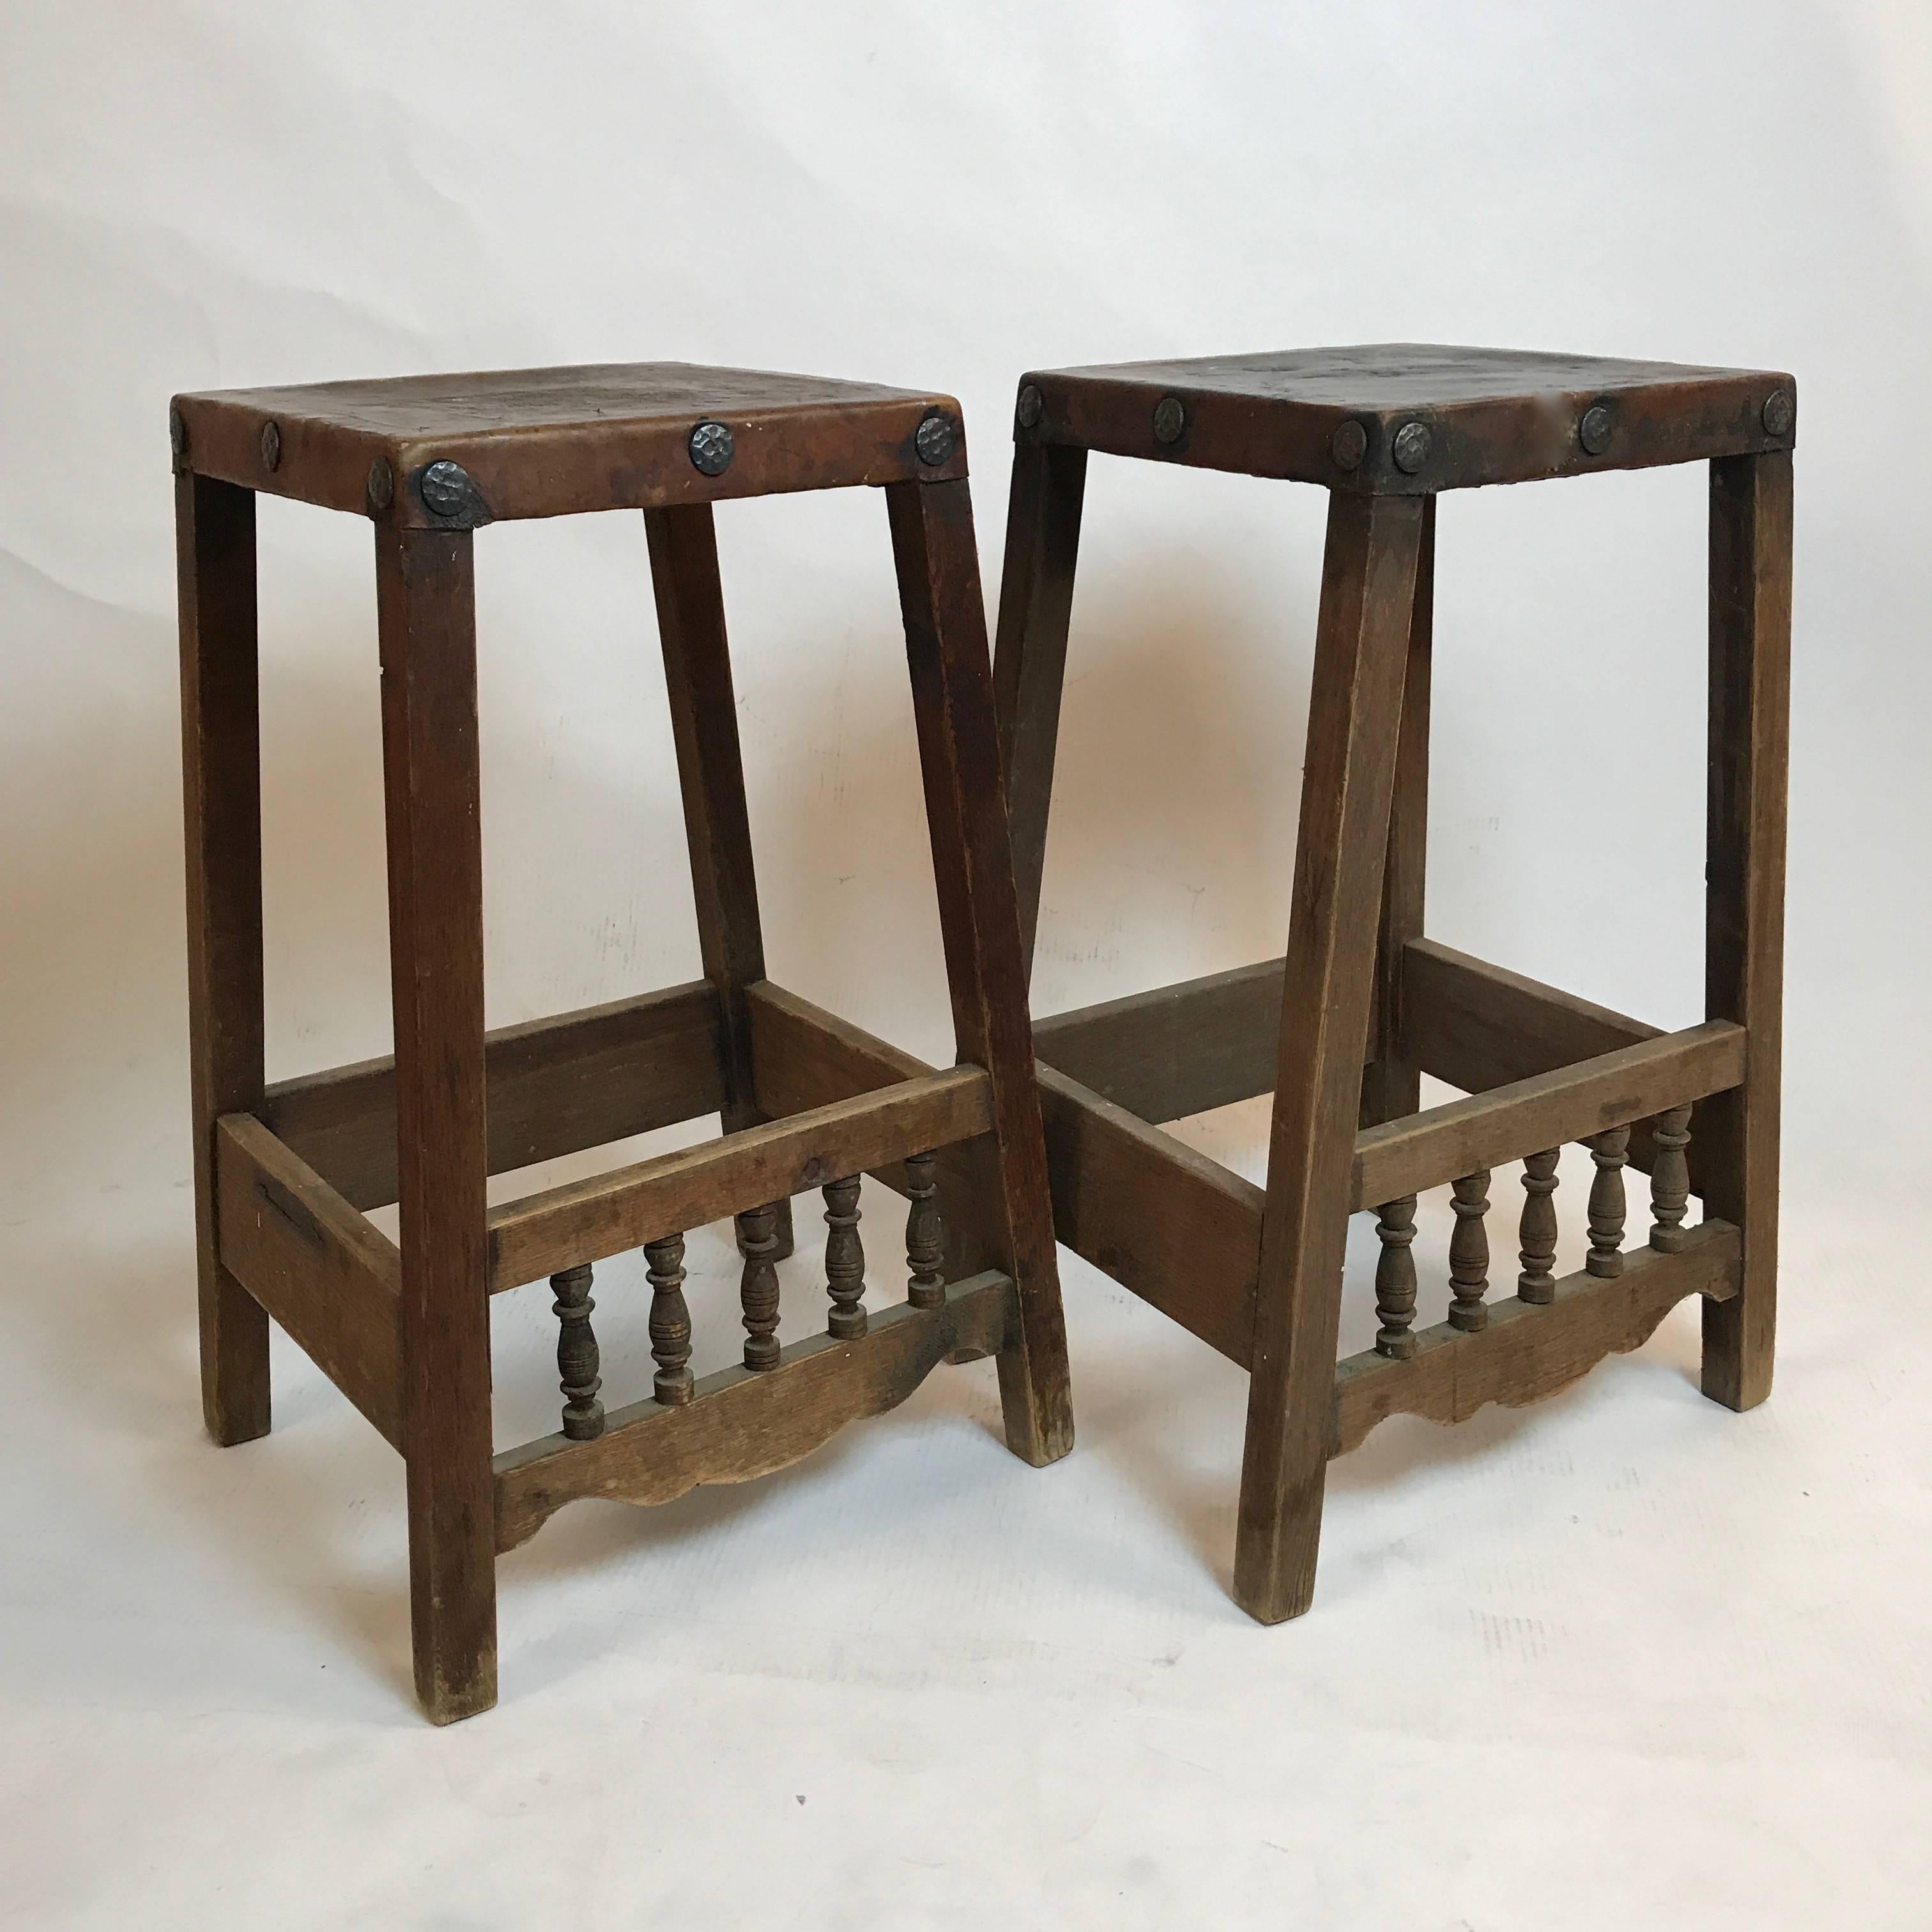 Very unique and solid handmade early American stools constructed of wood with sturdy tanned leather seats that have great patina. Also notice the hand-forged detail on the seat sides. Really great utilitarian stools.